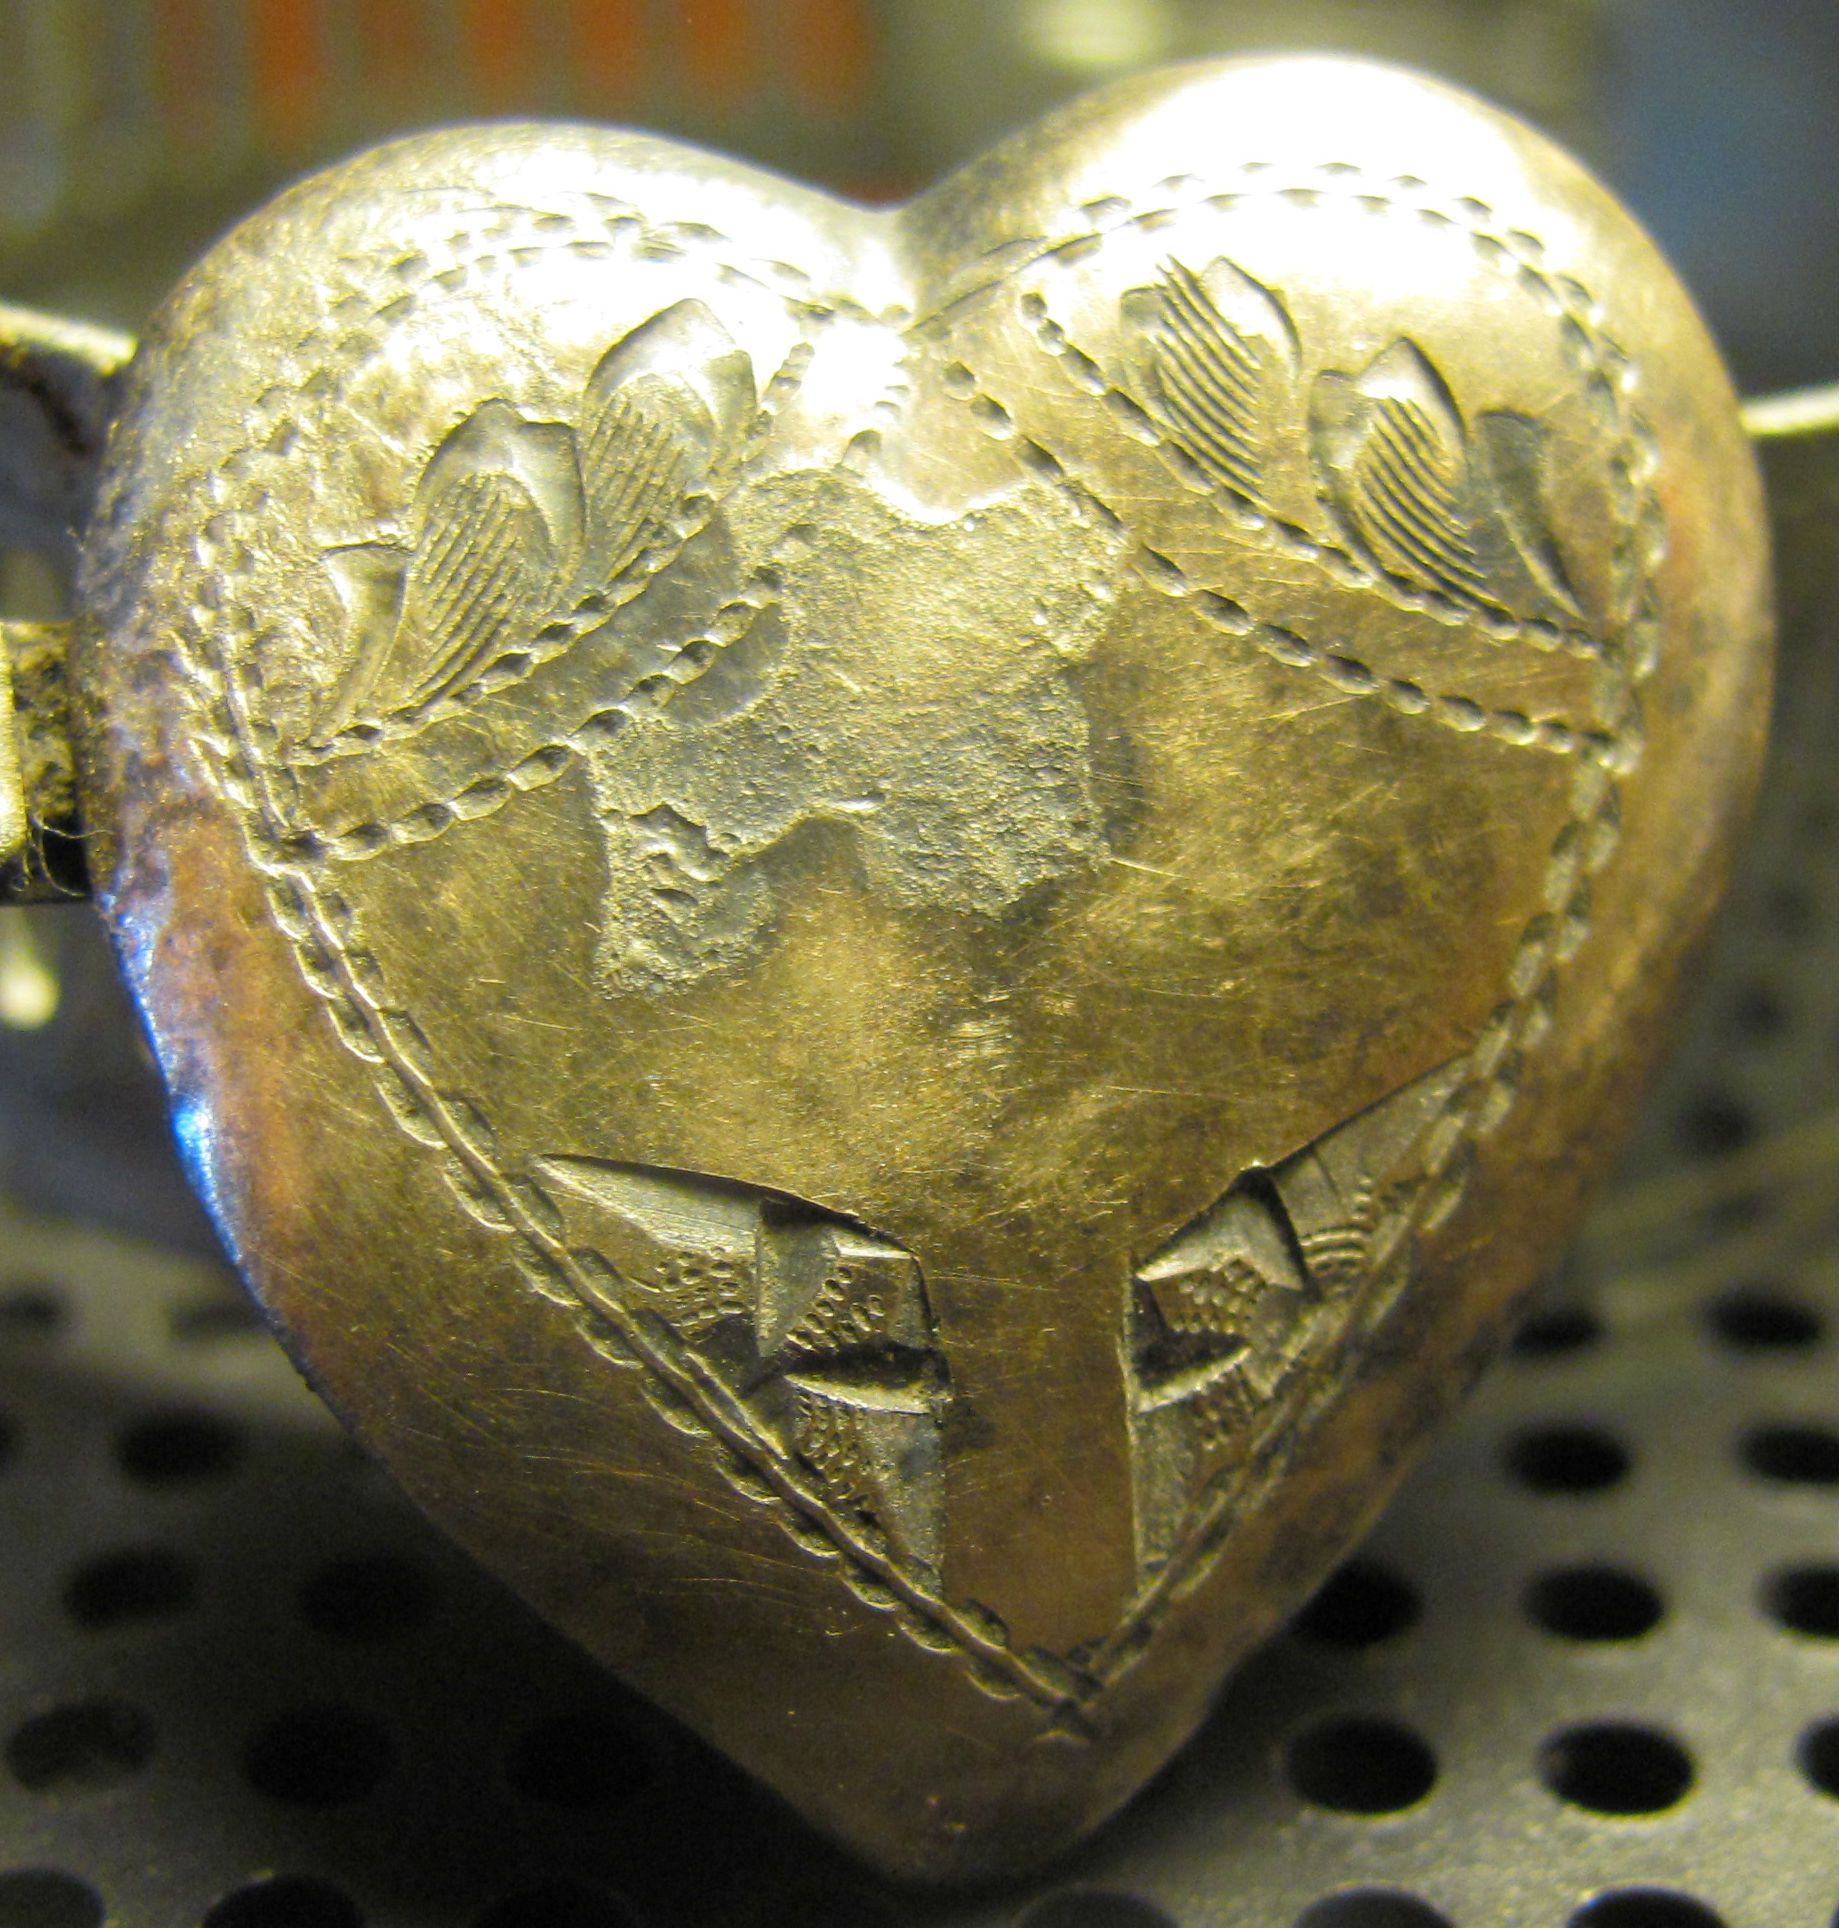 Heart Locket, 12k gold filled on sterling silver: A. L. Lindroth Company of North Attleboro, Mass. that was in business between the years 1896 and 193